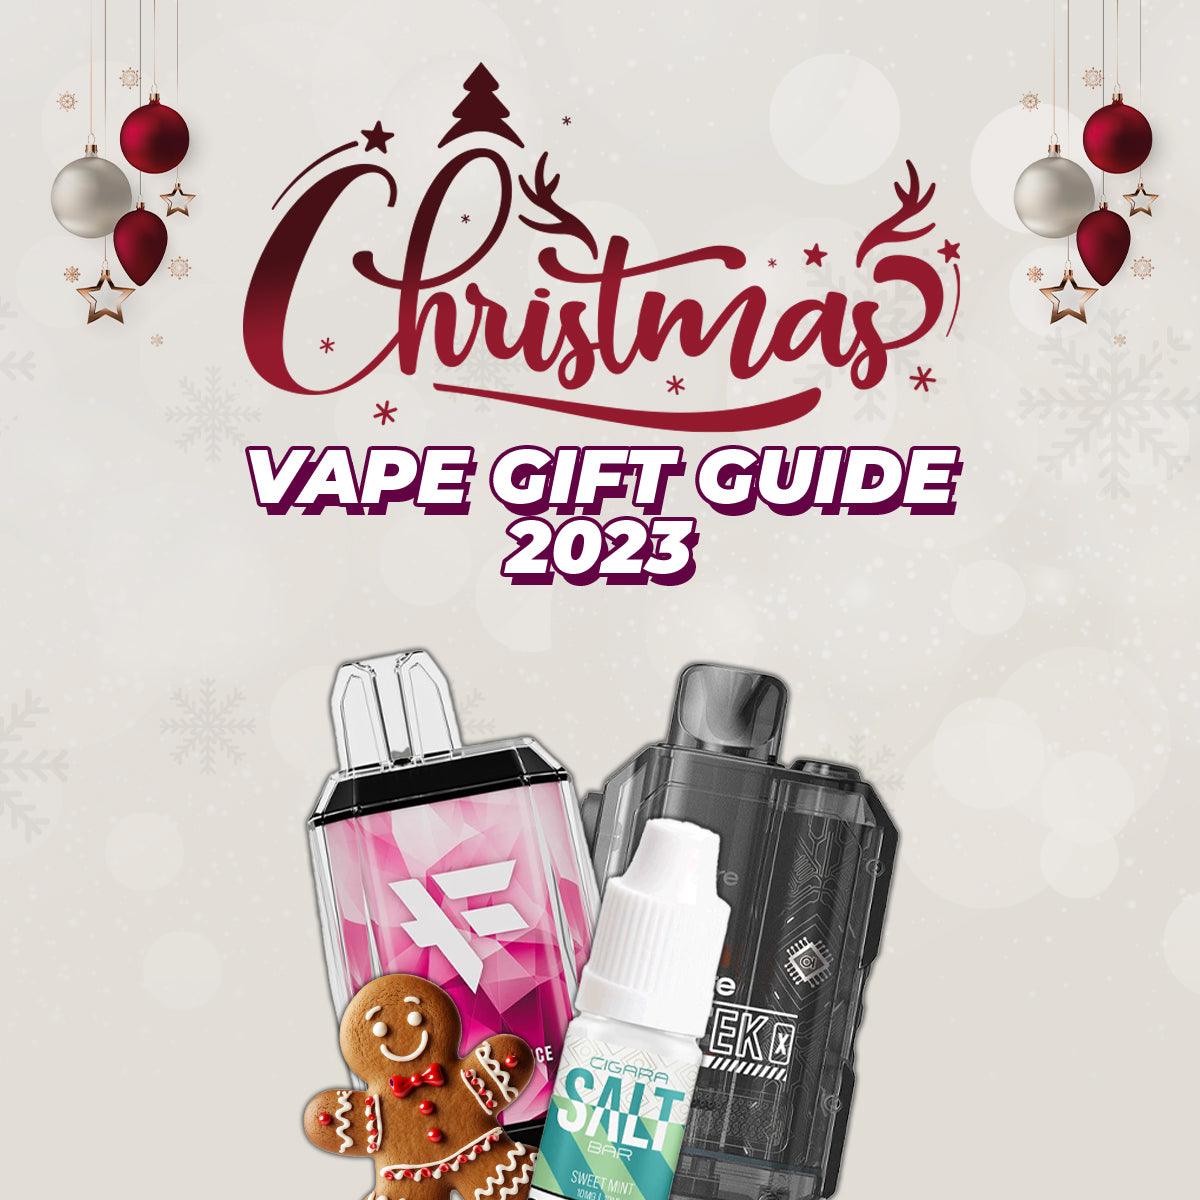 A Complete Guide To Christmas Vape Gifts 2023